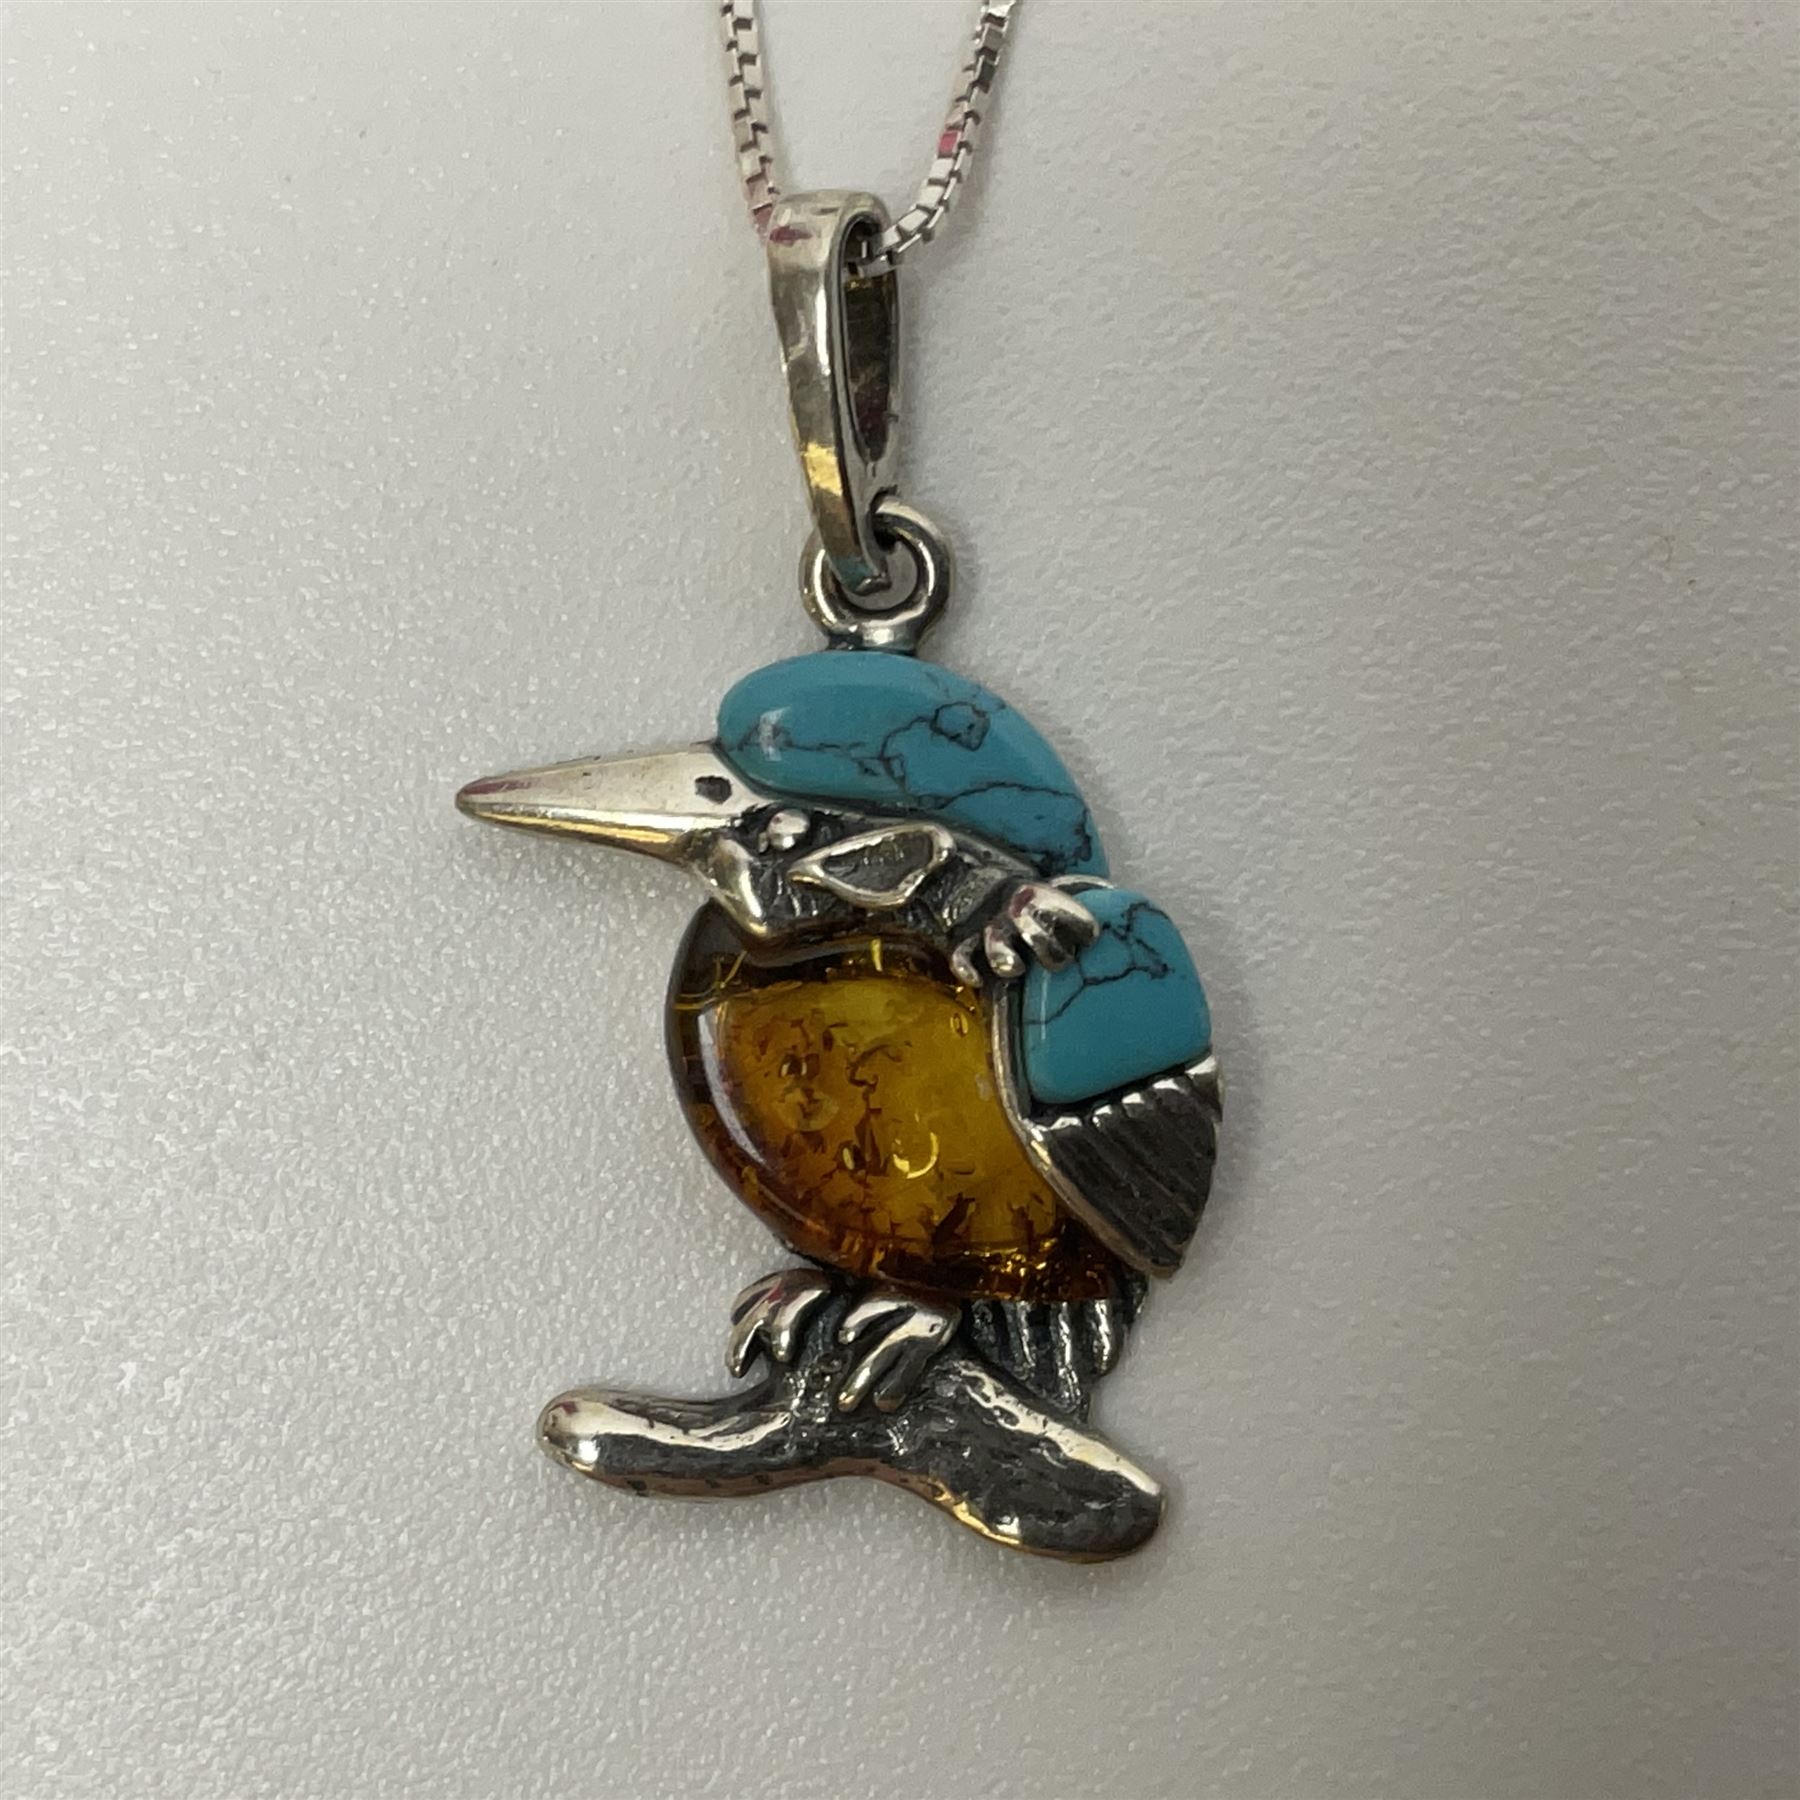 Silver Baltic Amber and Turquoise Kingfisher Pendant Necklace. Stamped 925. This sweet little sil - Image 4 of 4